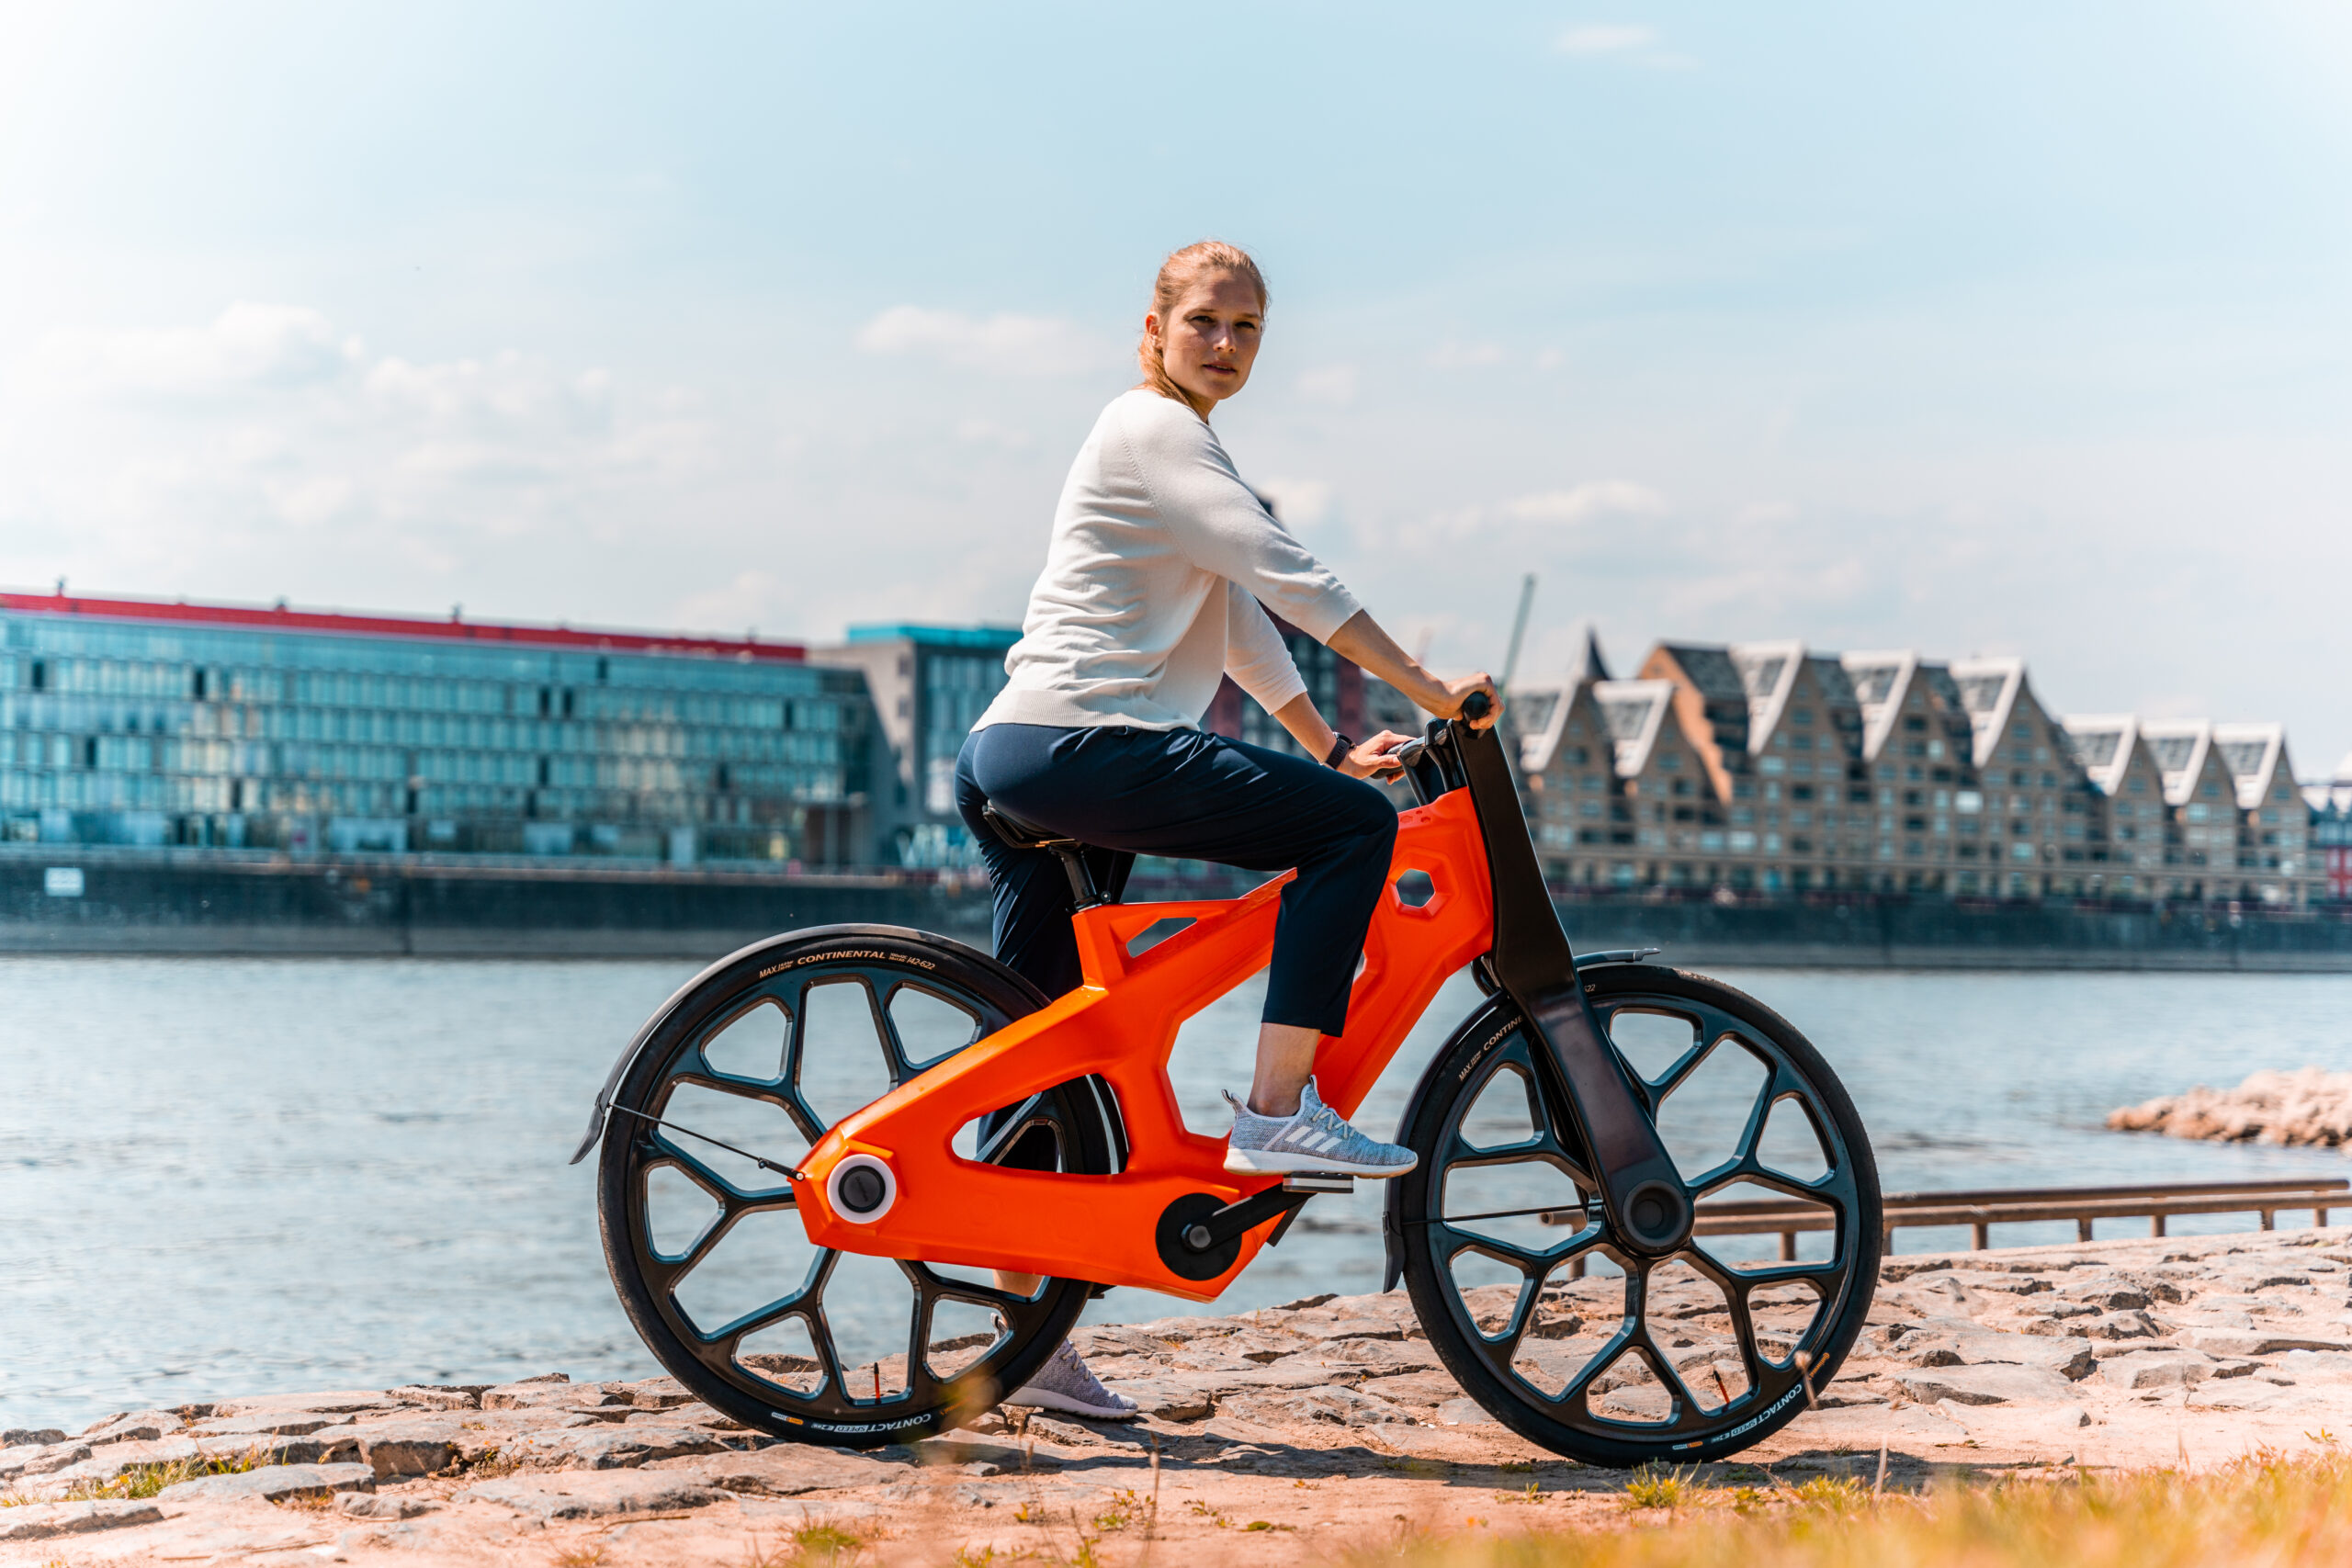 This Bicycle Is Made From Recycled Plastic Using Renewable Energy [Video]